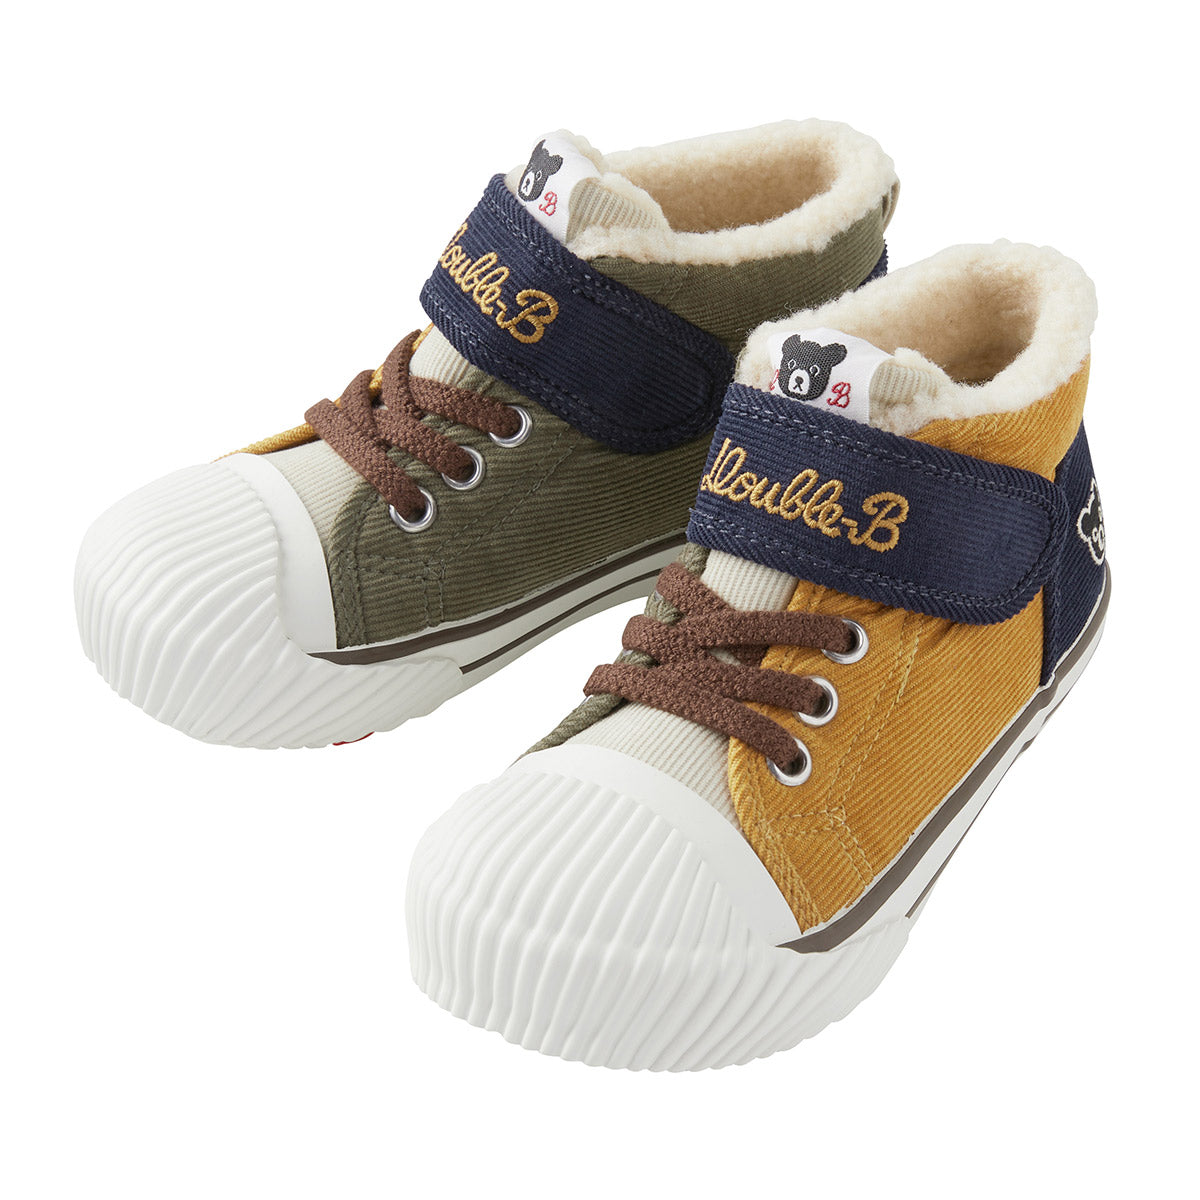 DOUBLE_B Corduroy-Meets-Texture Sneakers for Kids